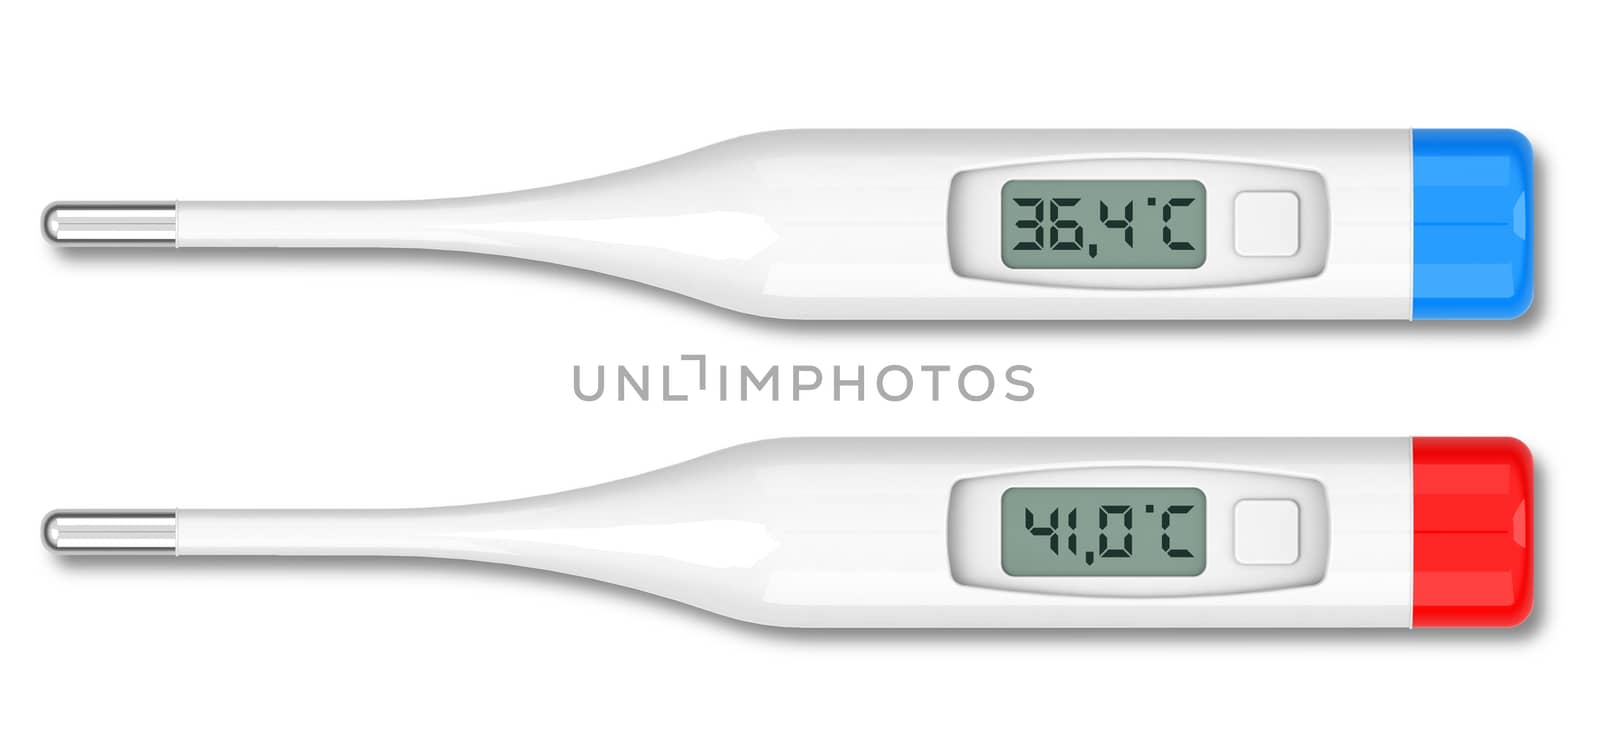 the thermometers by delta_art